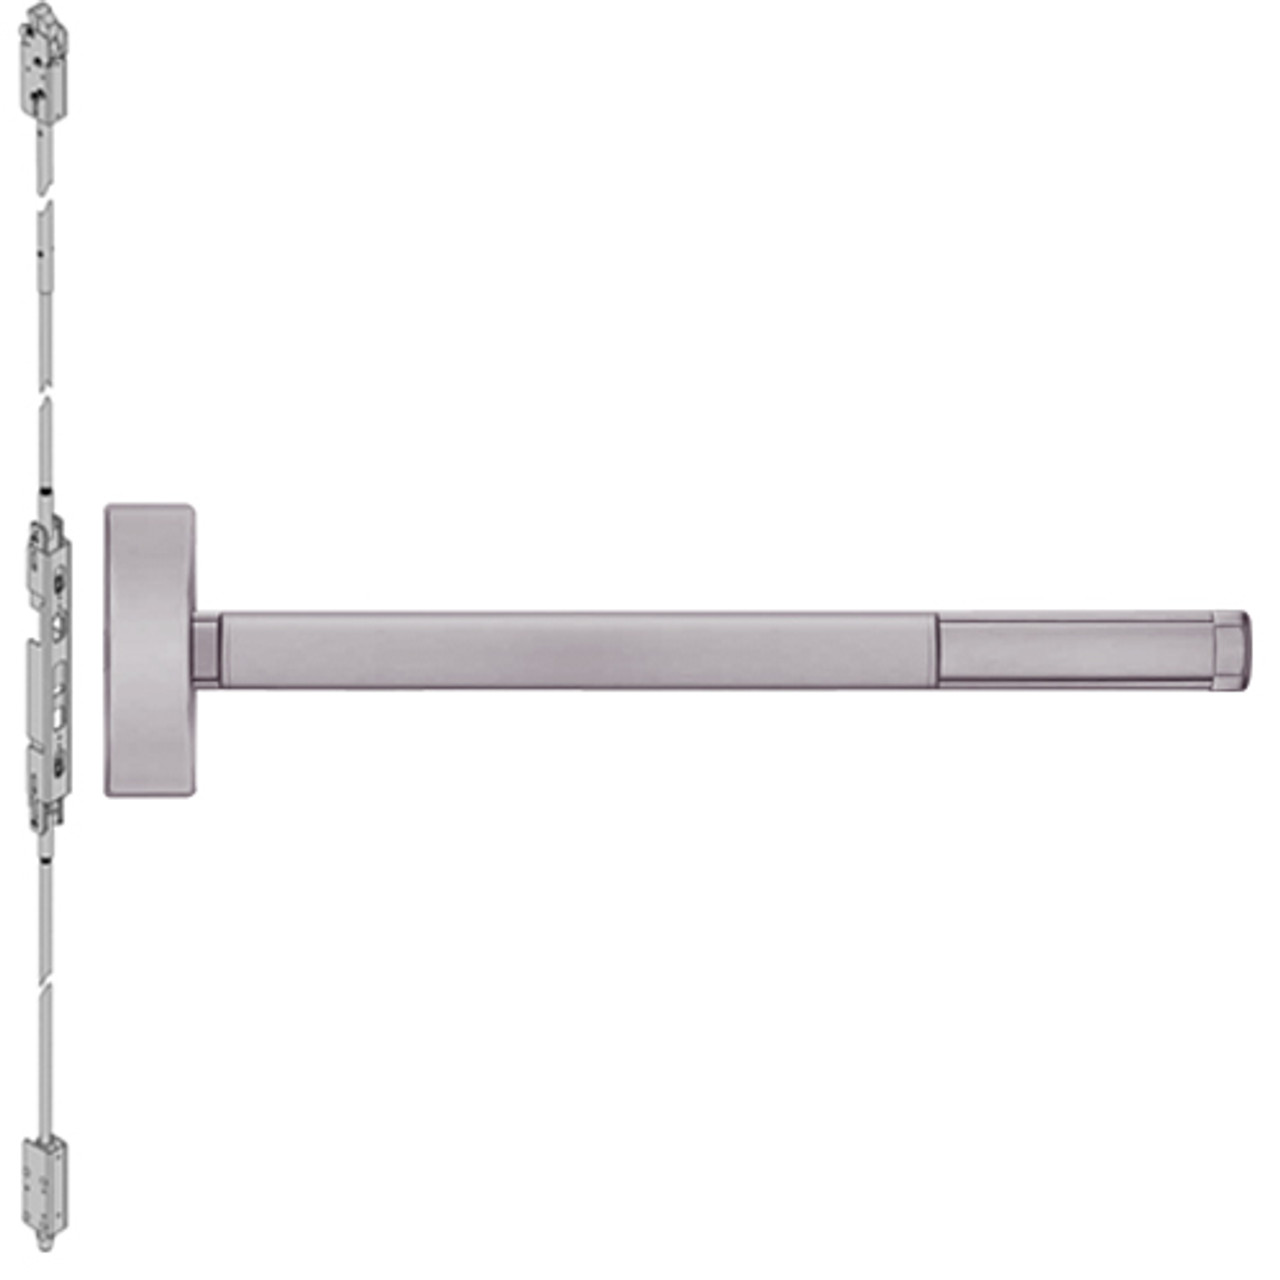 ELRFL2815LBR-630-48 PHI 2800 Series Fire Rated Concealed Vertical Rod Exit Device with Electric Latch Retraction Prepped for Thumbpiece Always Active in Satin Stainless Steel Finish